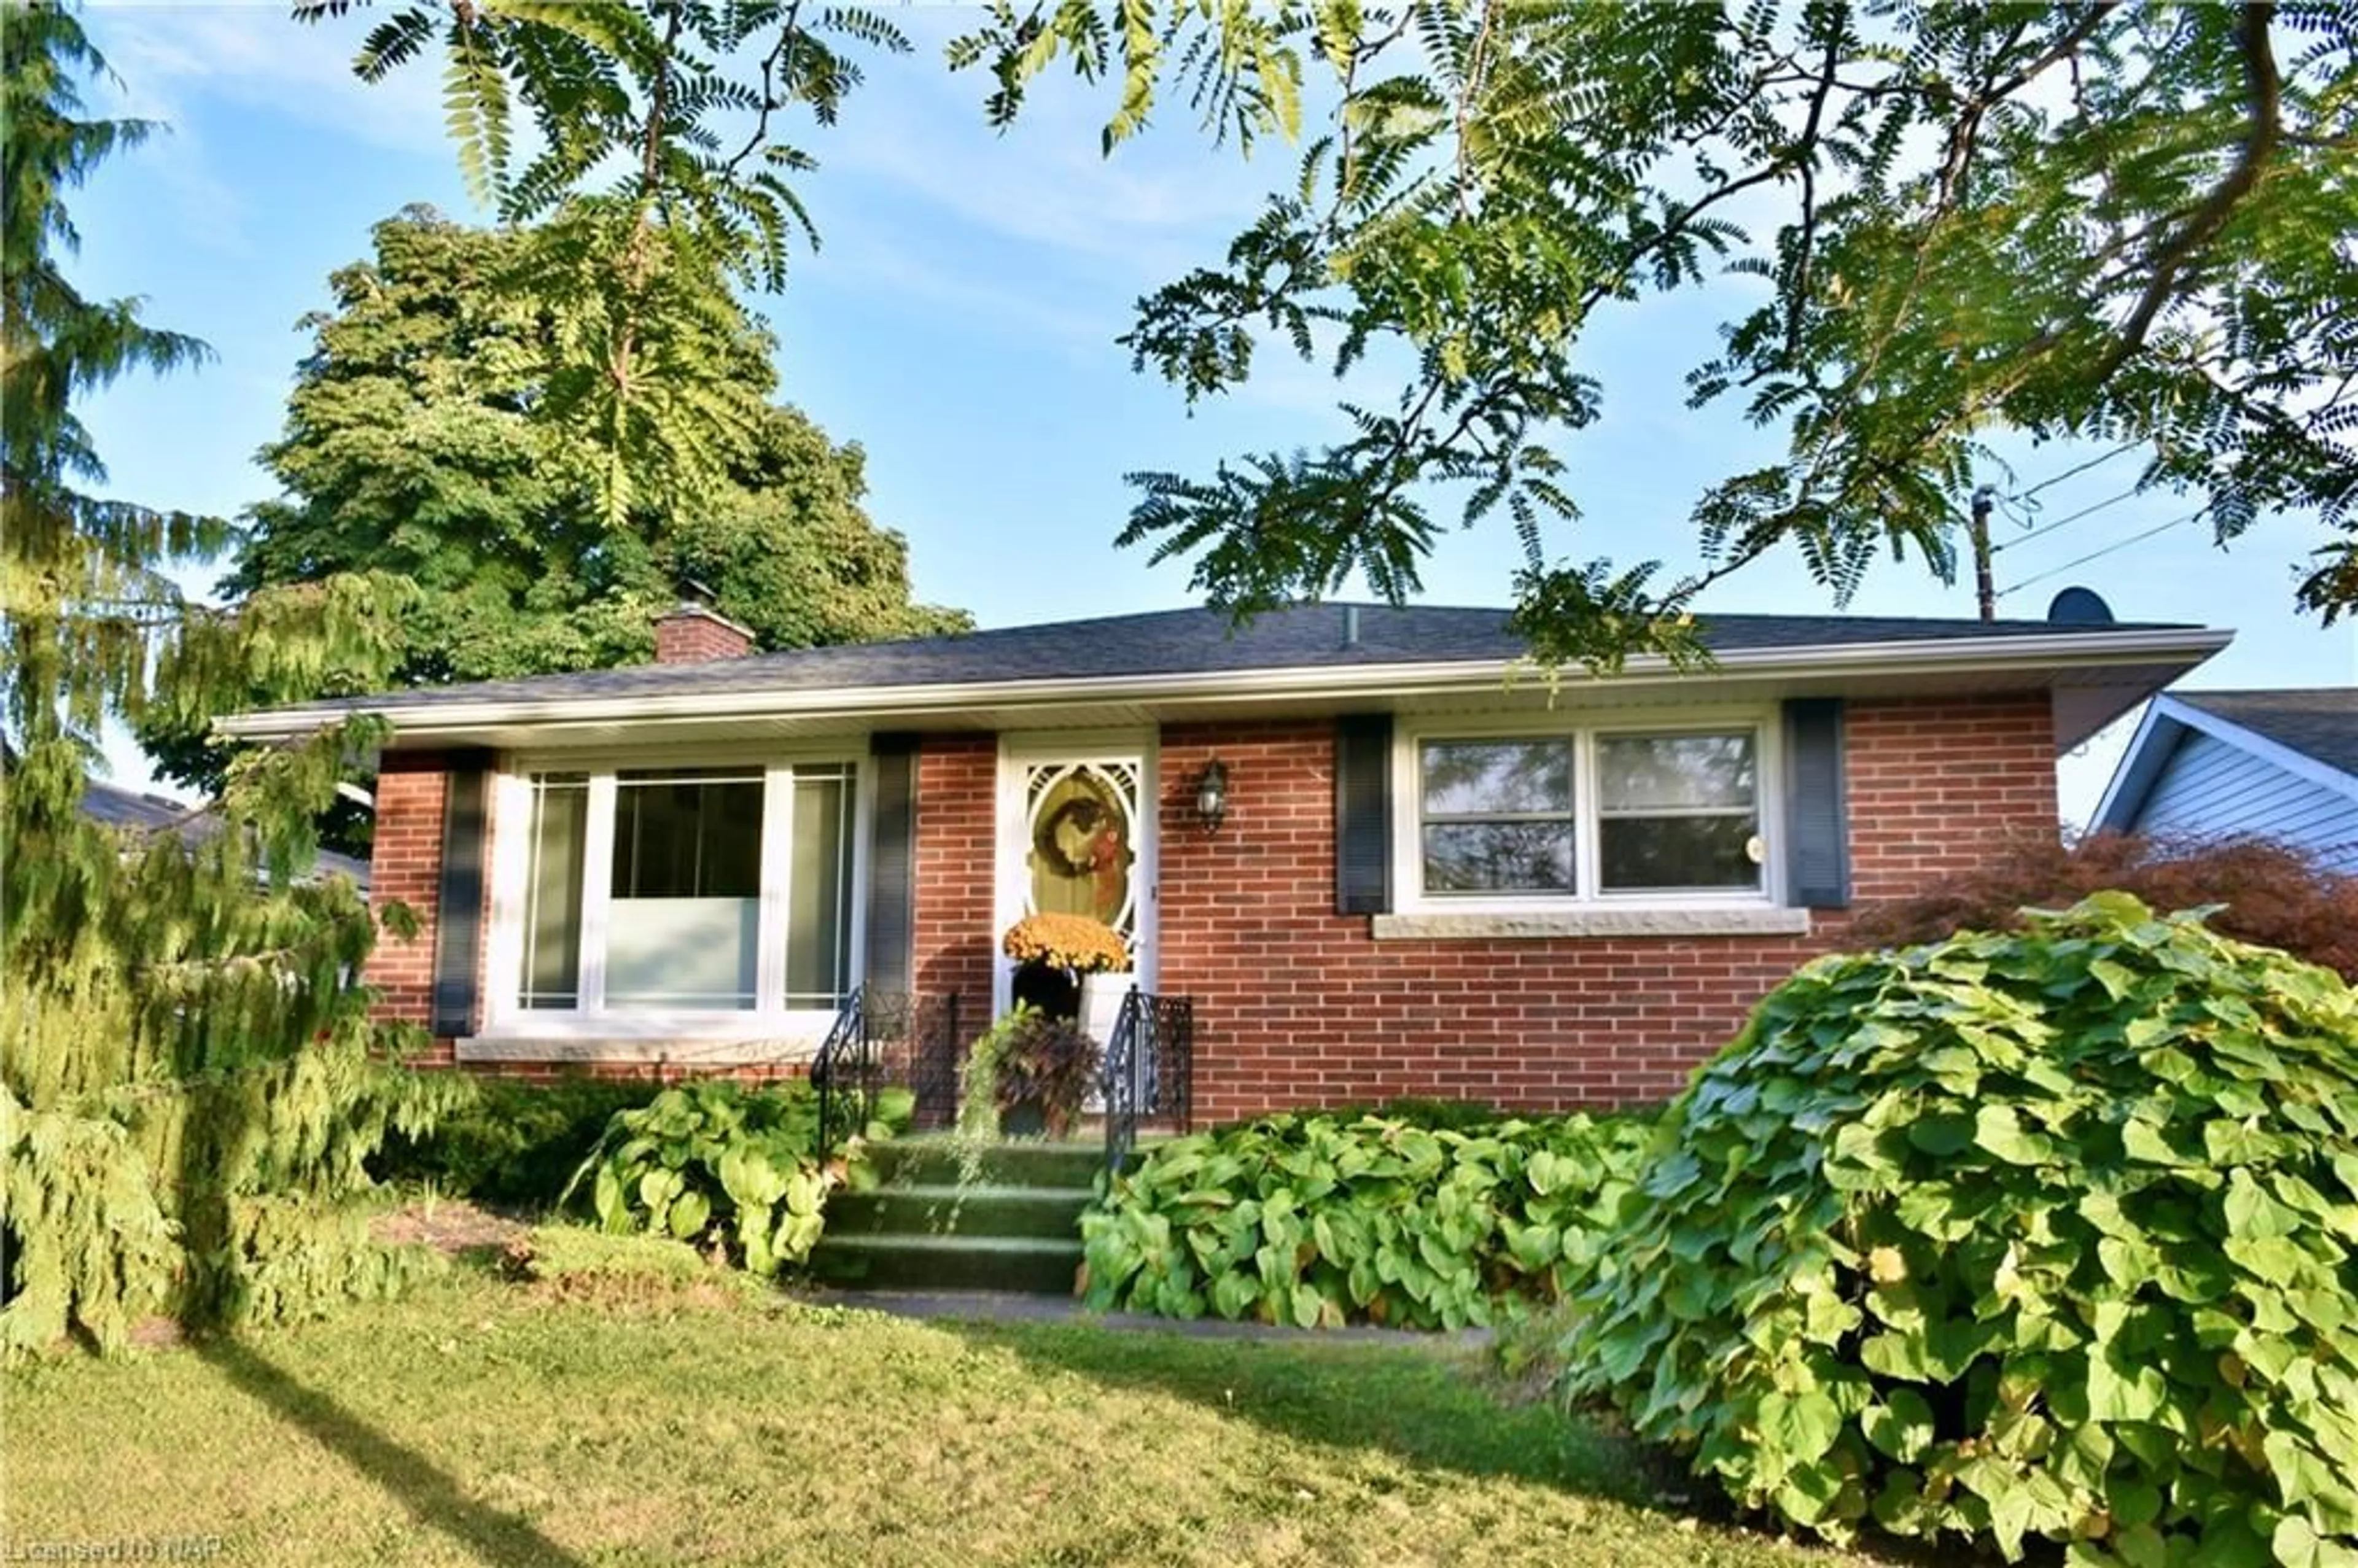 Home with brick exterior material for 8 Henry St, Niagara-on-the-Lake Ontario L0S 1T0